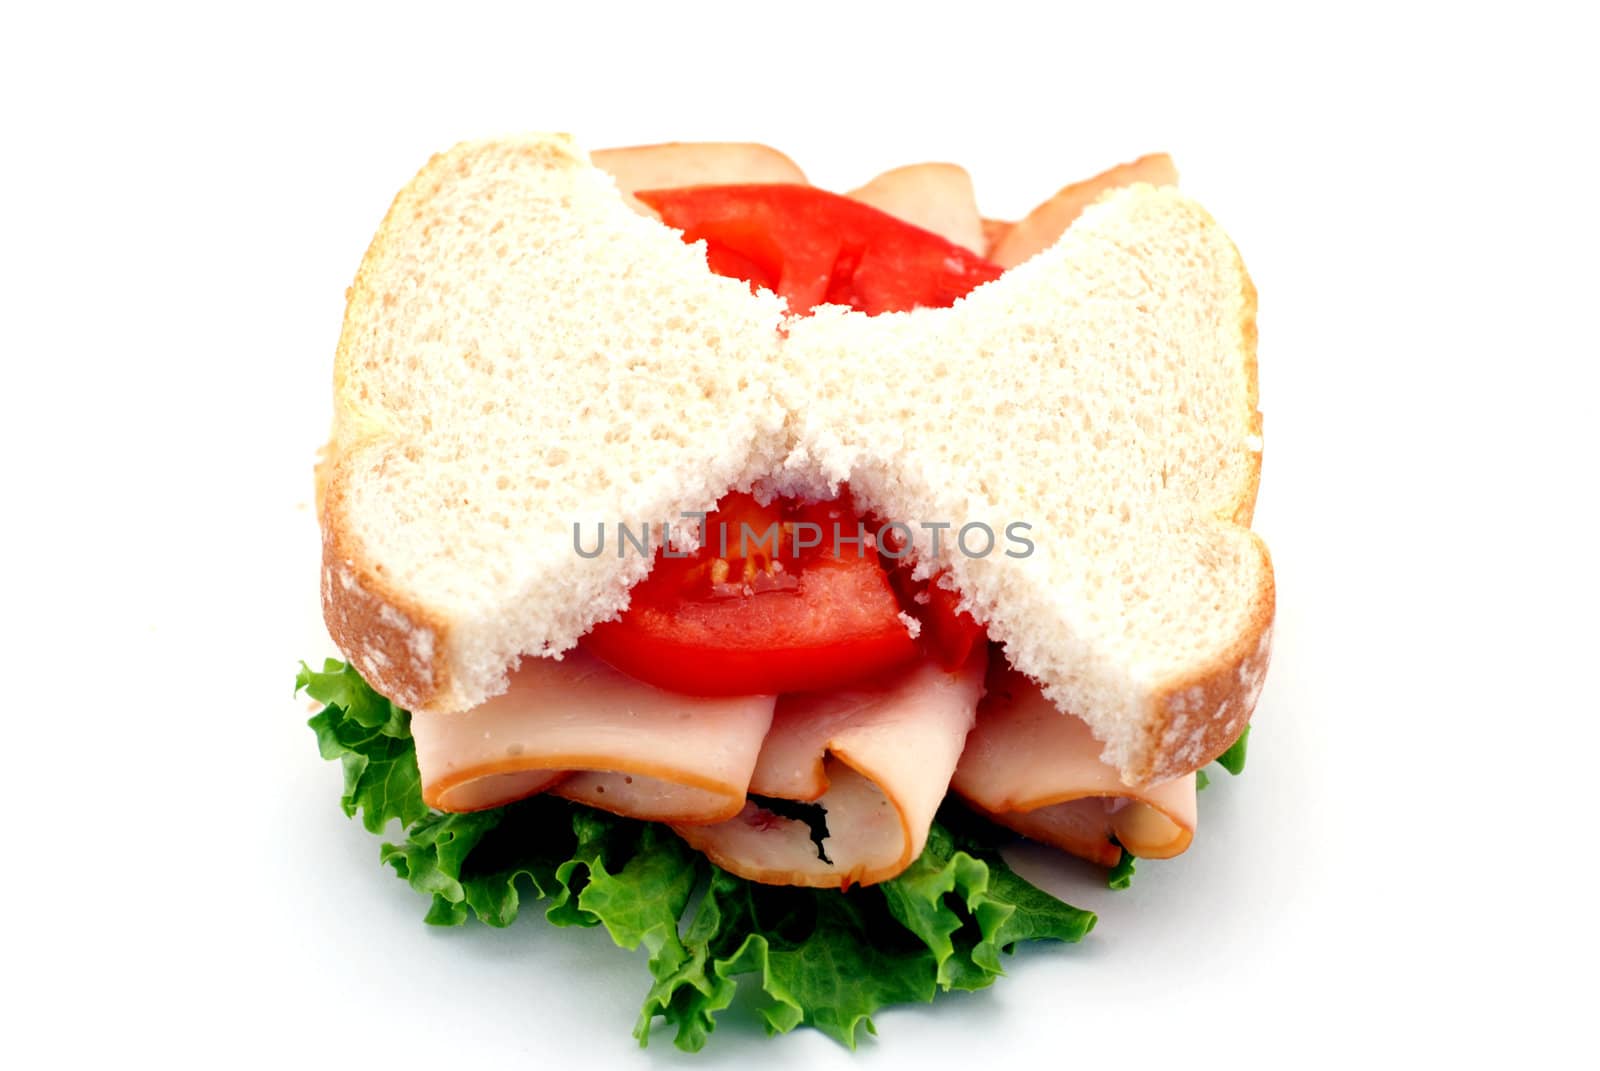 Low-carb diet concept with skinny bread slices on a turkey sandwich isolated over a white background